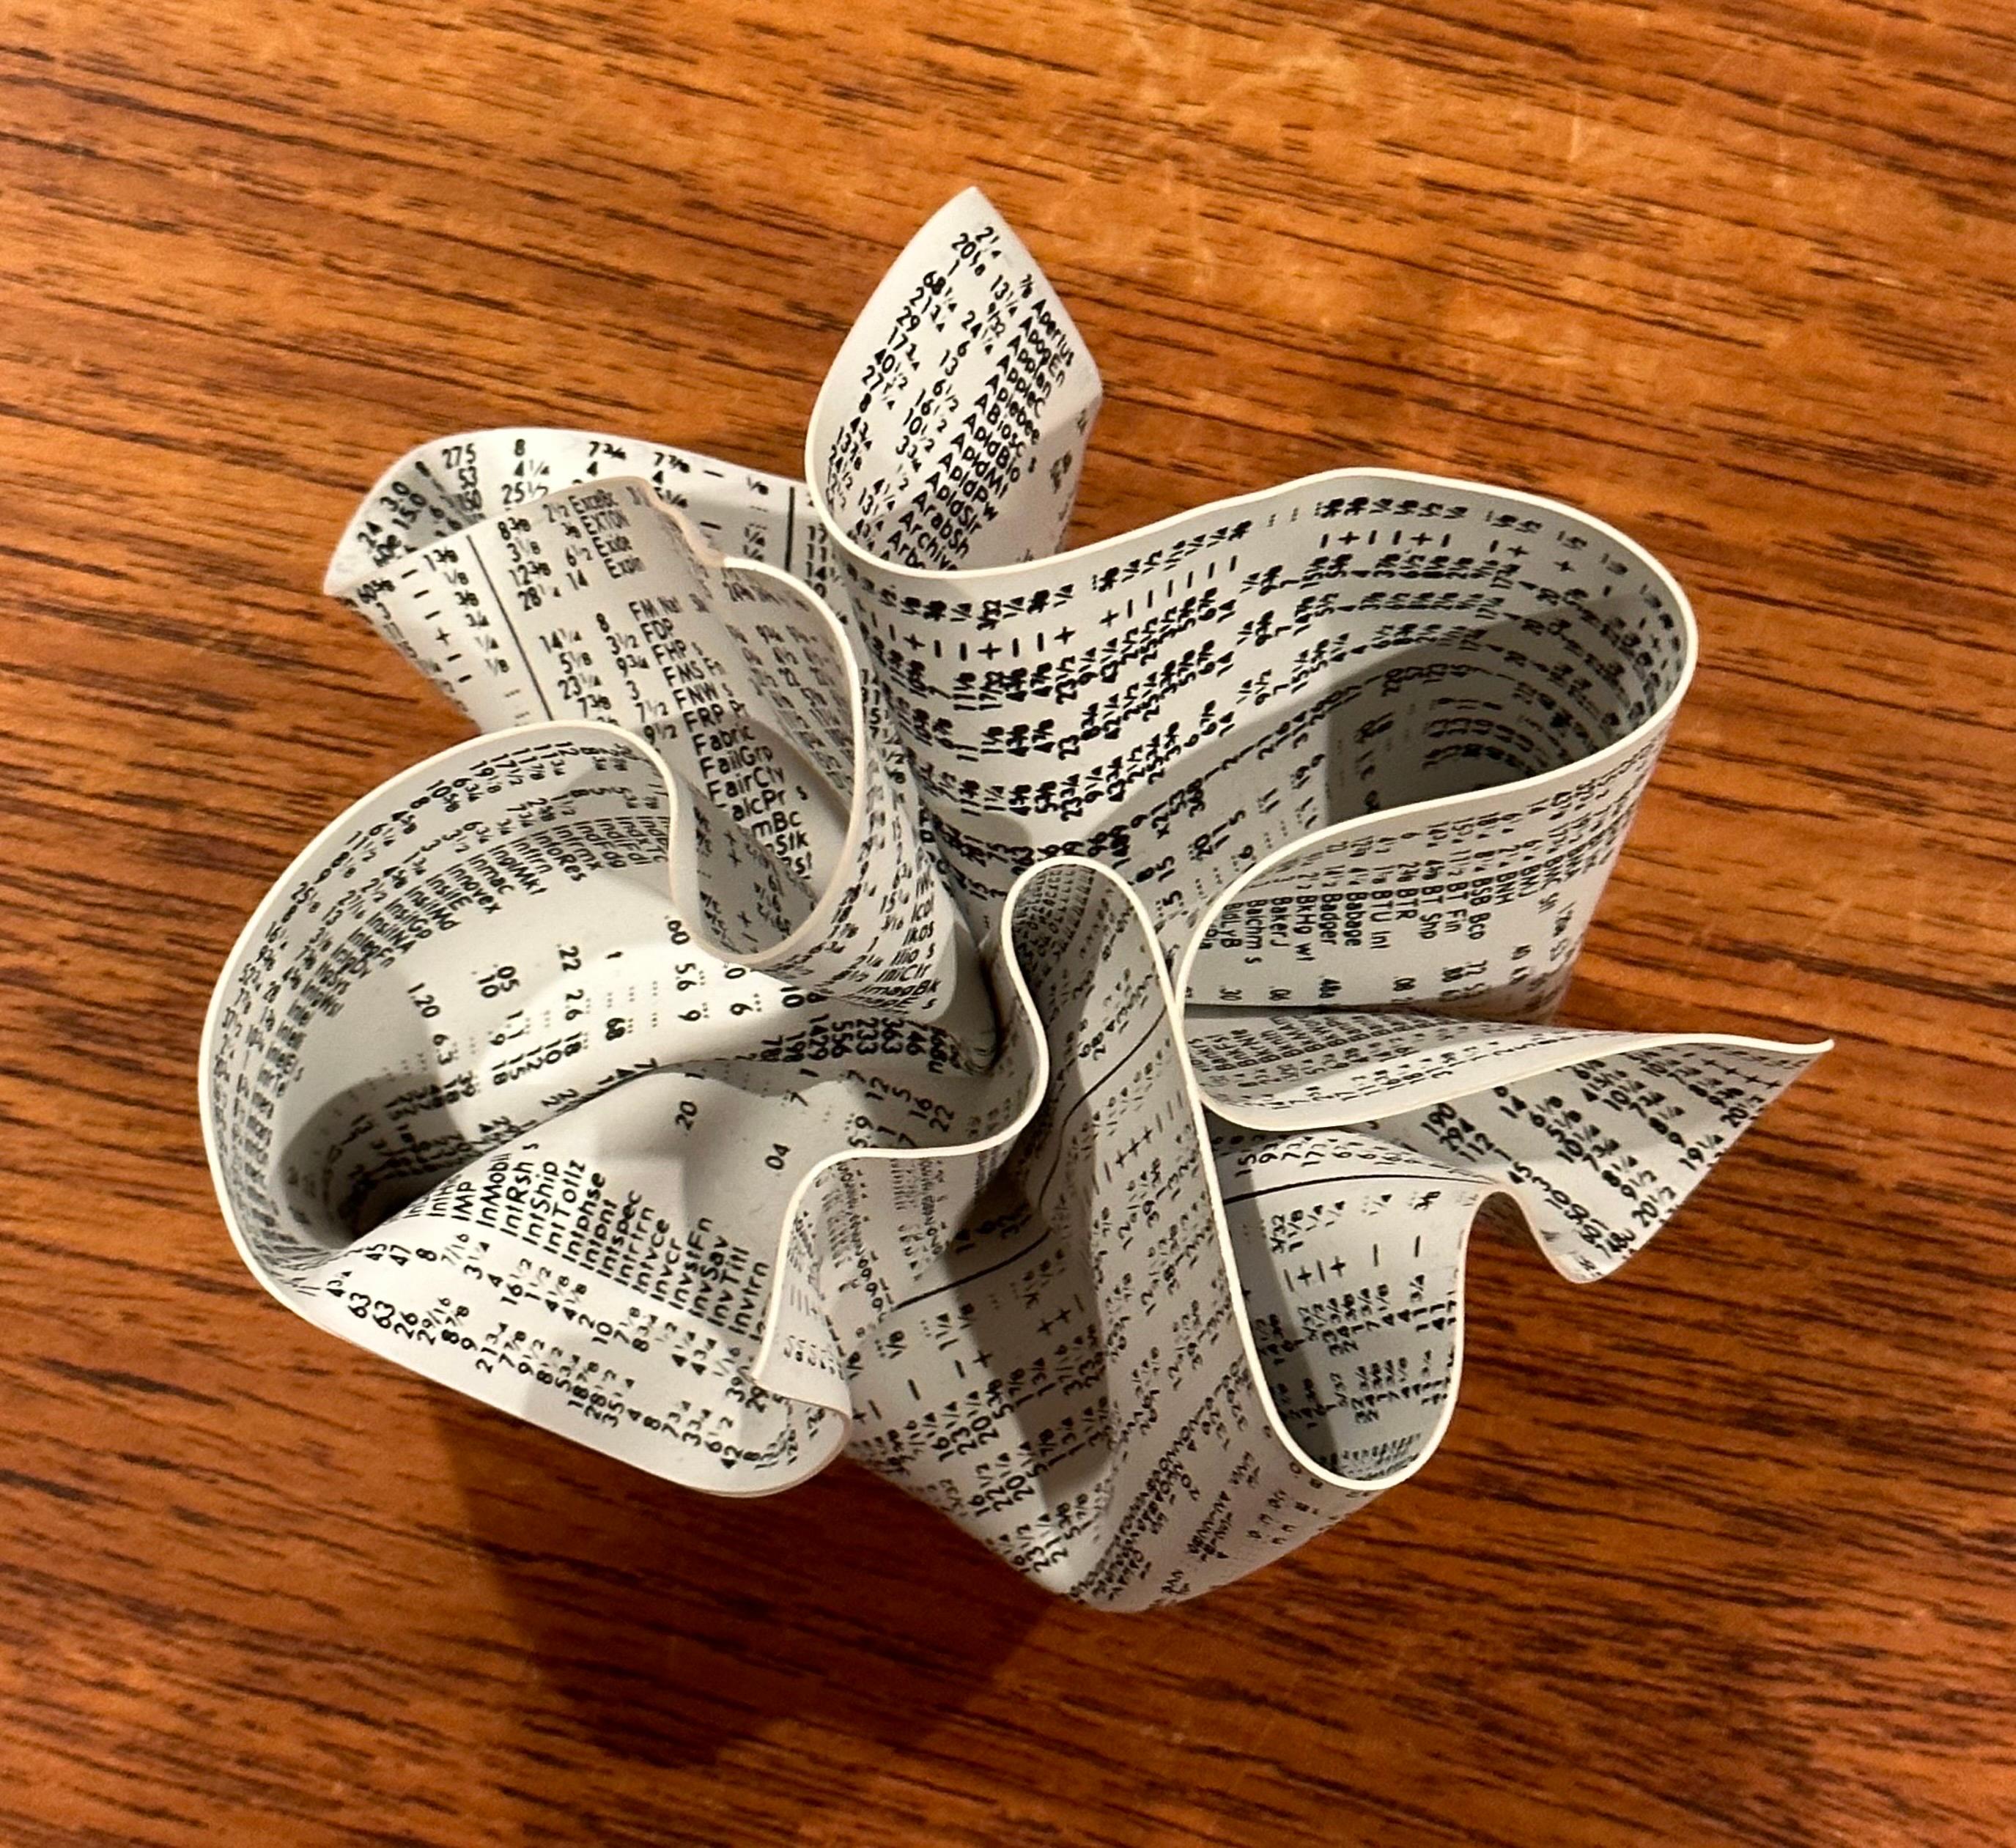 Cast Crumpled WSJ / Newspaper Paperweight by Designer Tibor Kalman for M & Co. / MOMA For Sale